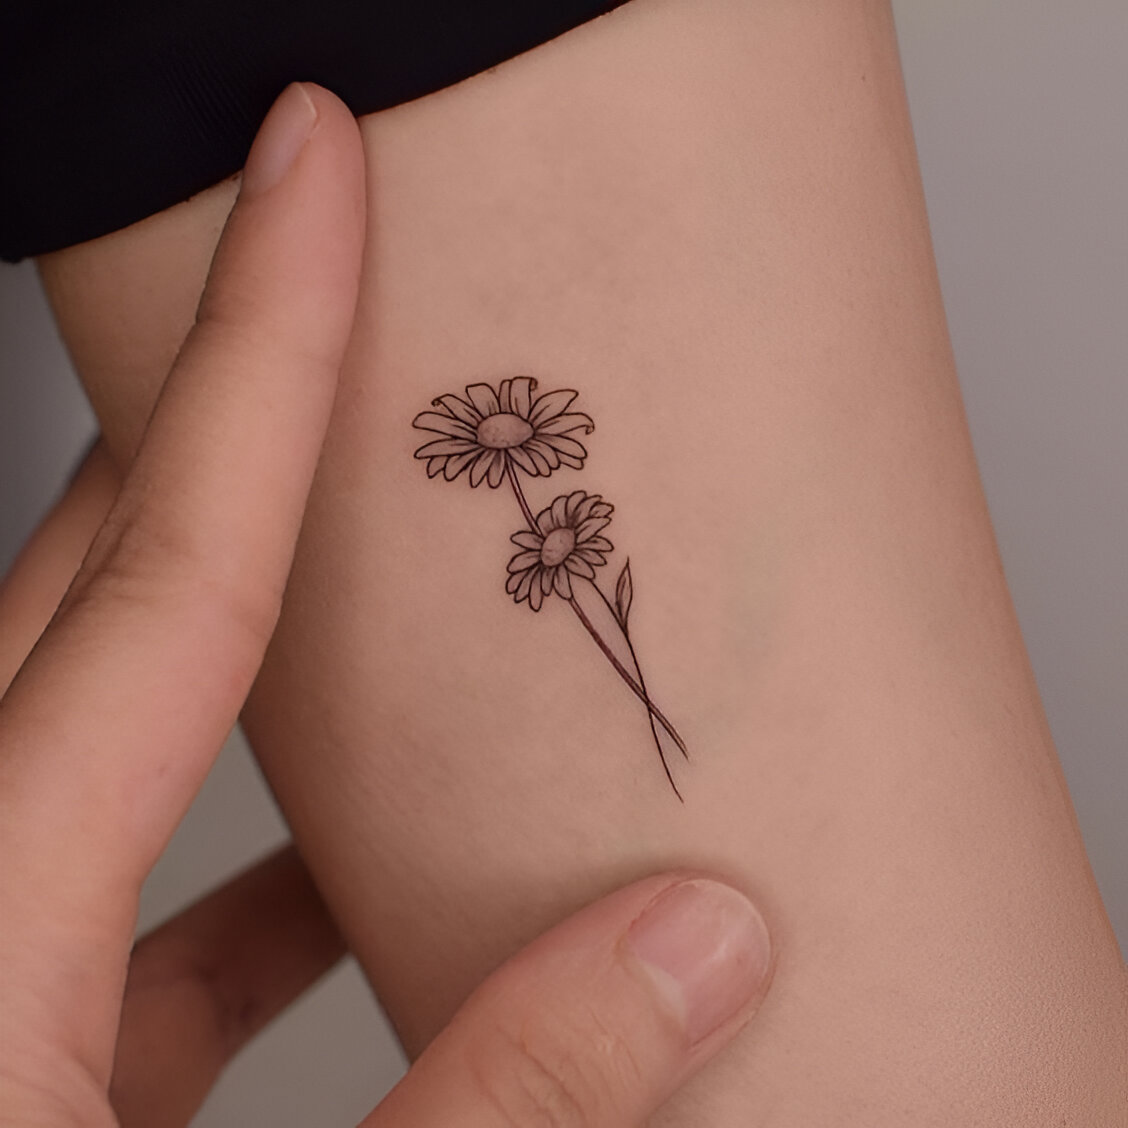 Mini Flower Tattoos With Two Daises